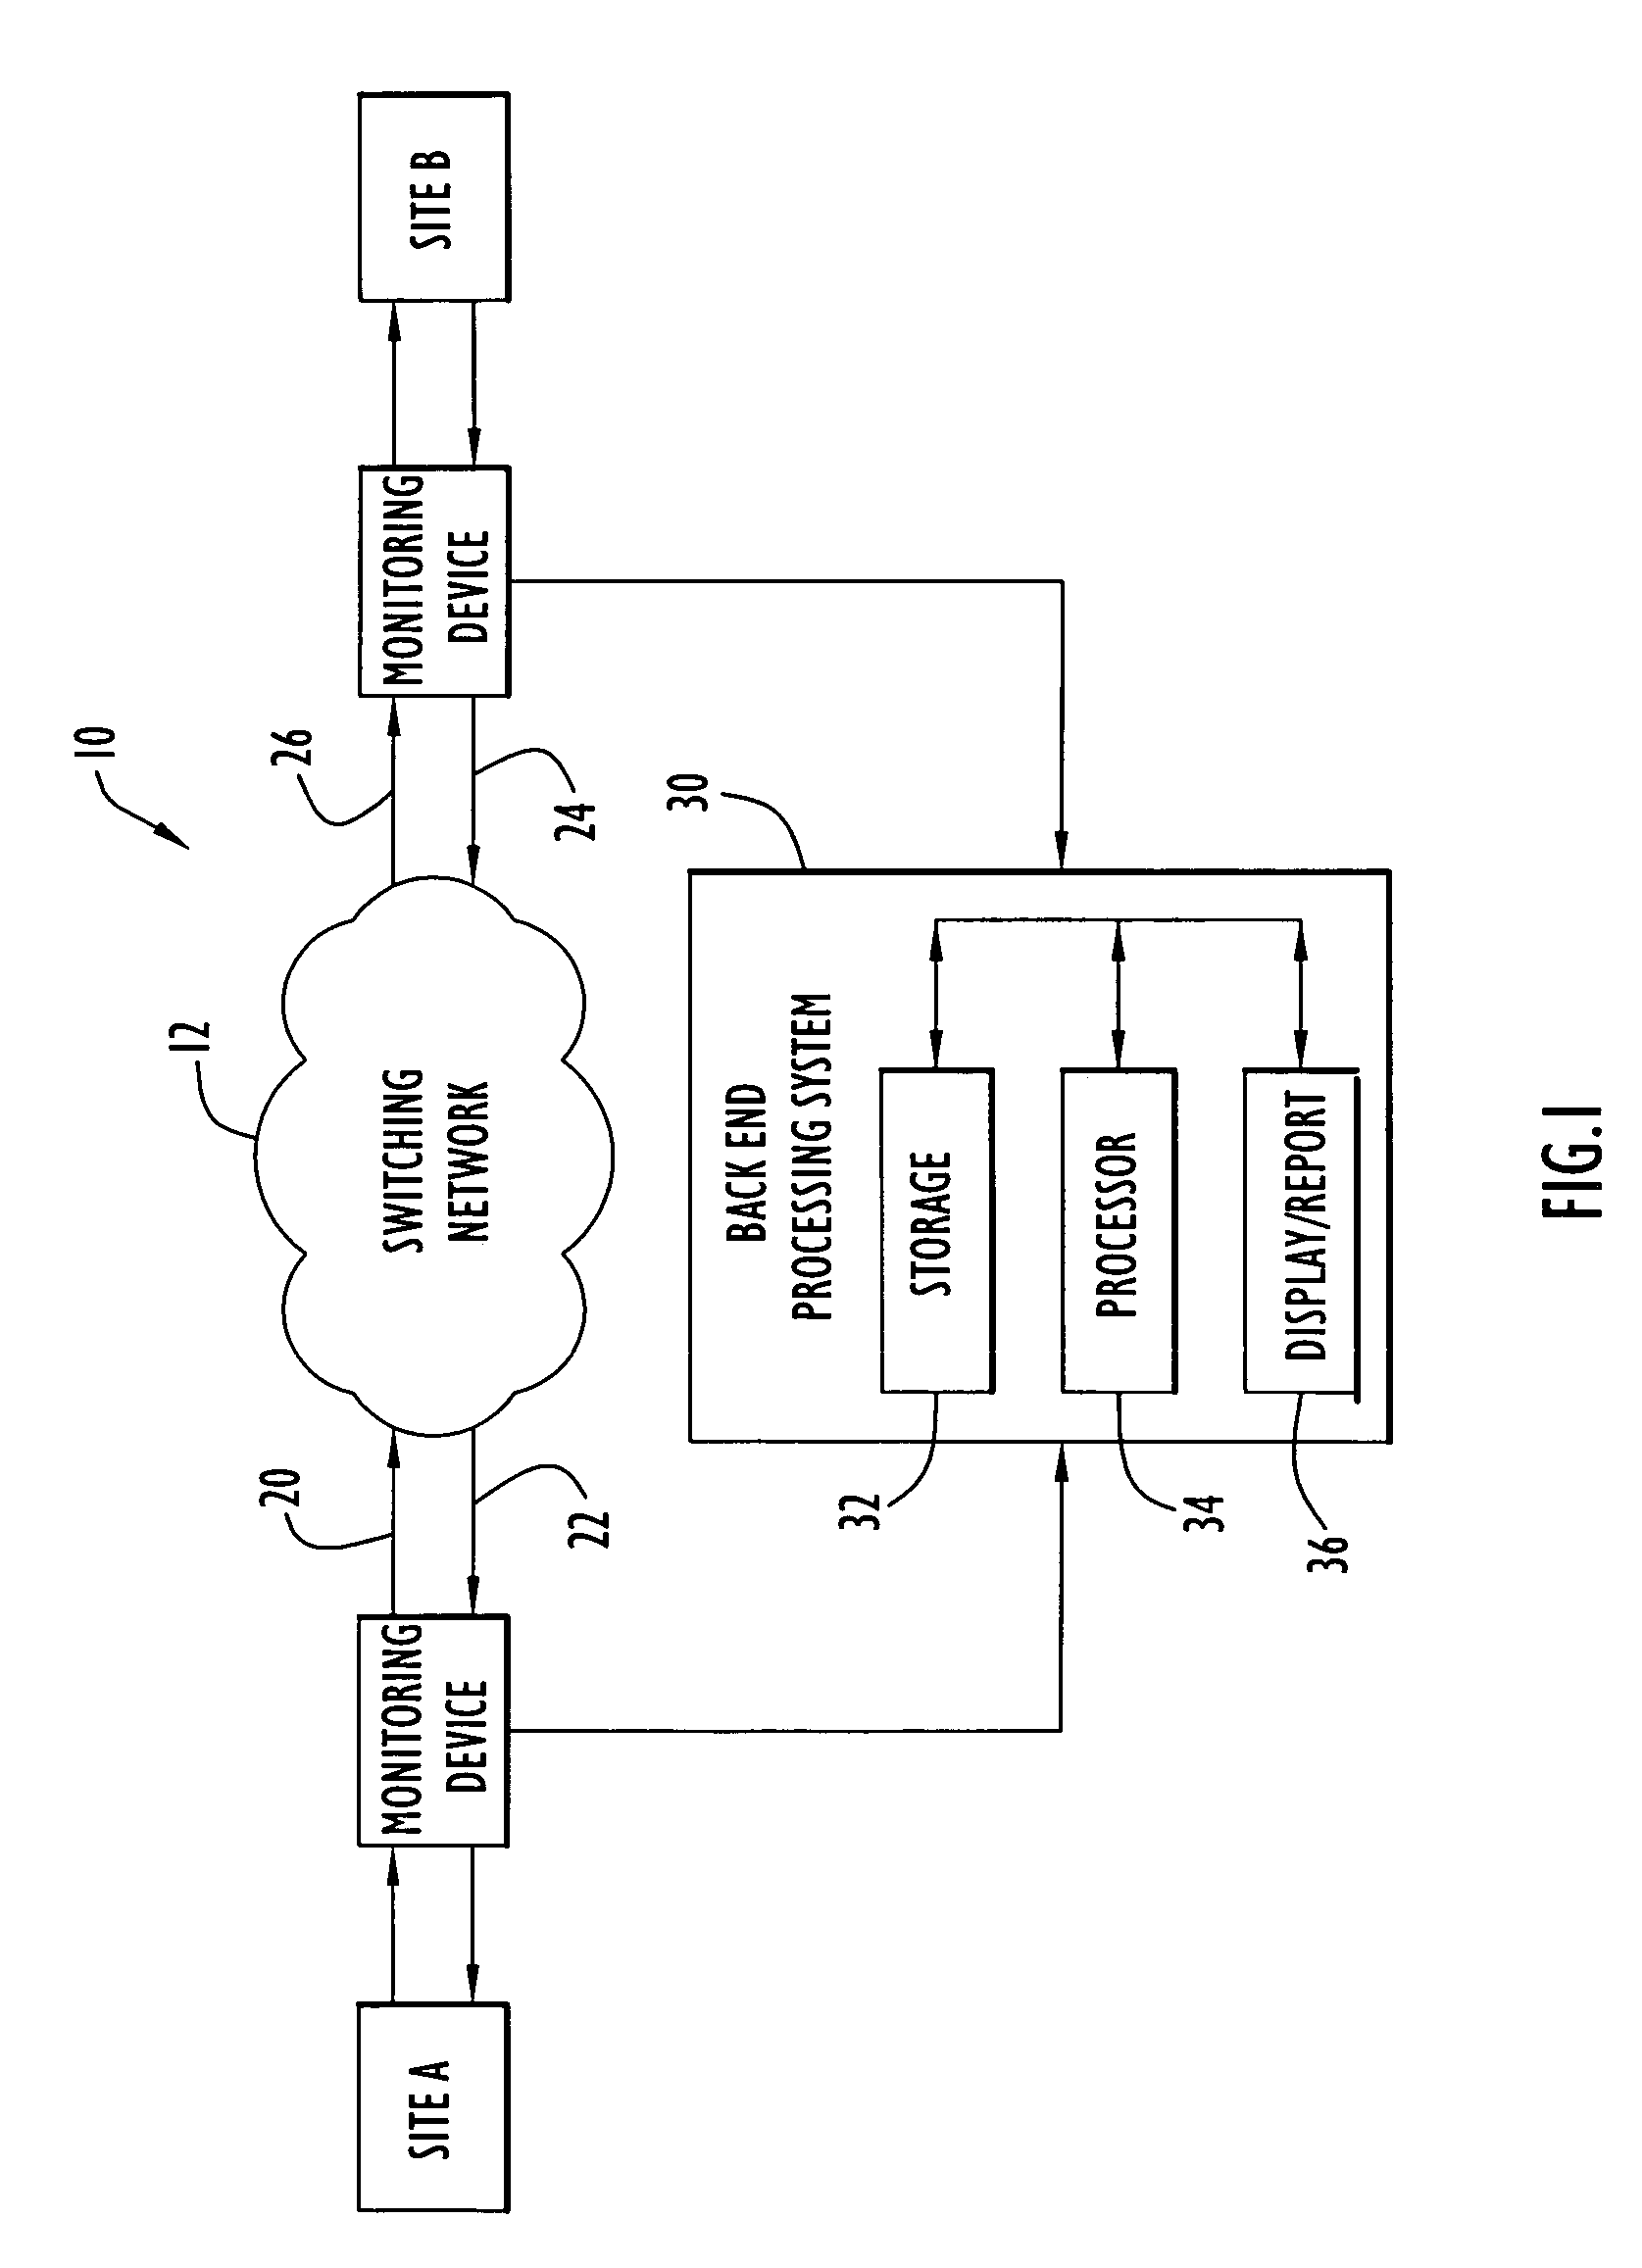 Methods and apparatus for identifying chronic performance problems on data networks